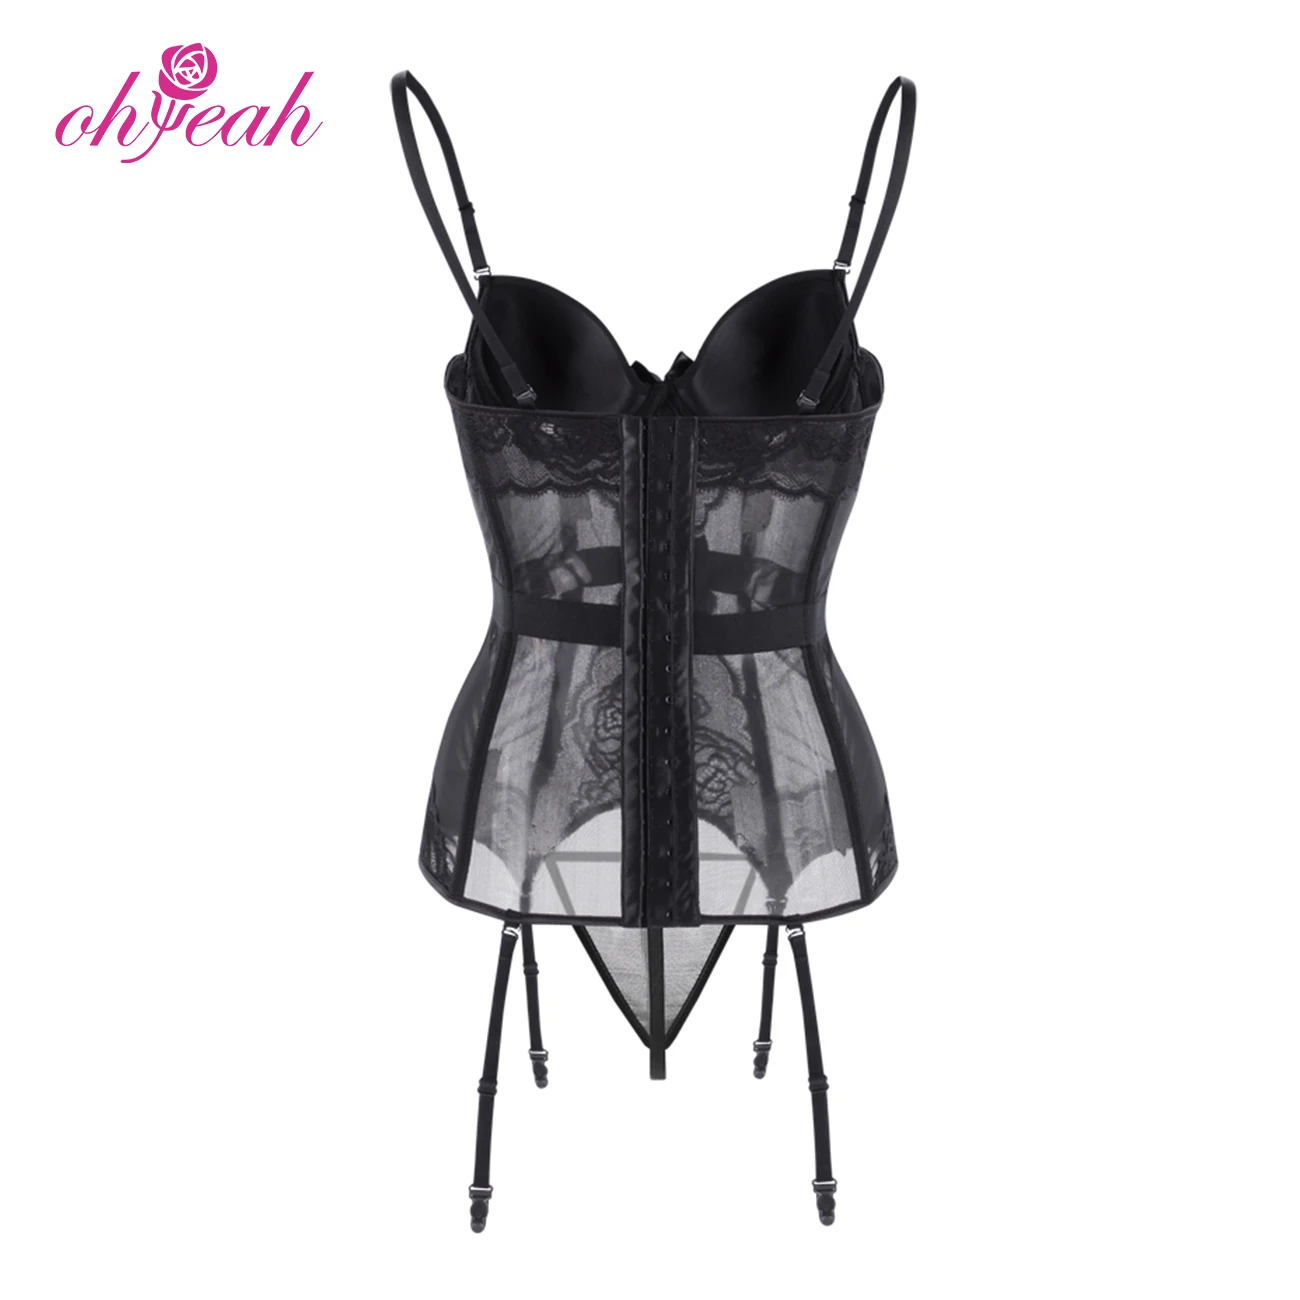 High Fashion Lingerie Sexy Corset Tight Sexy Girls Corset Buy Tight